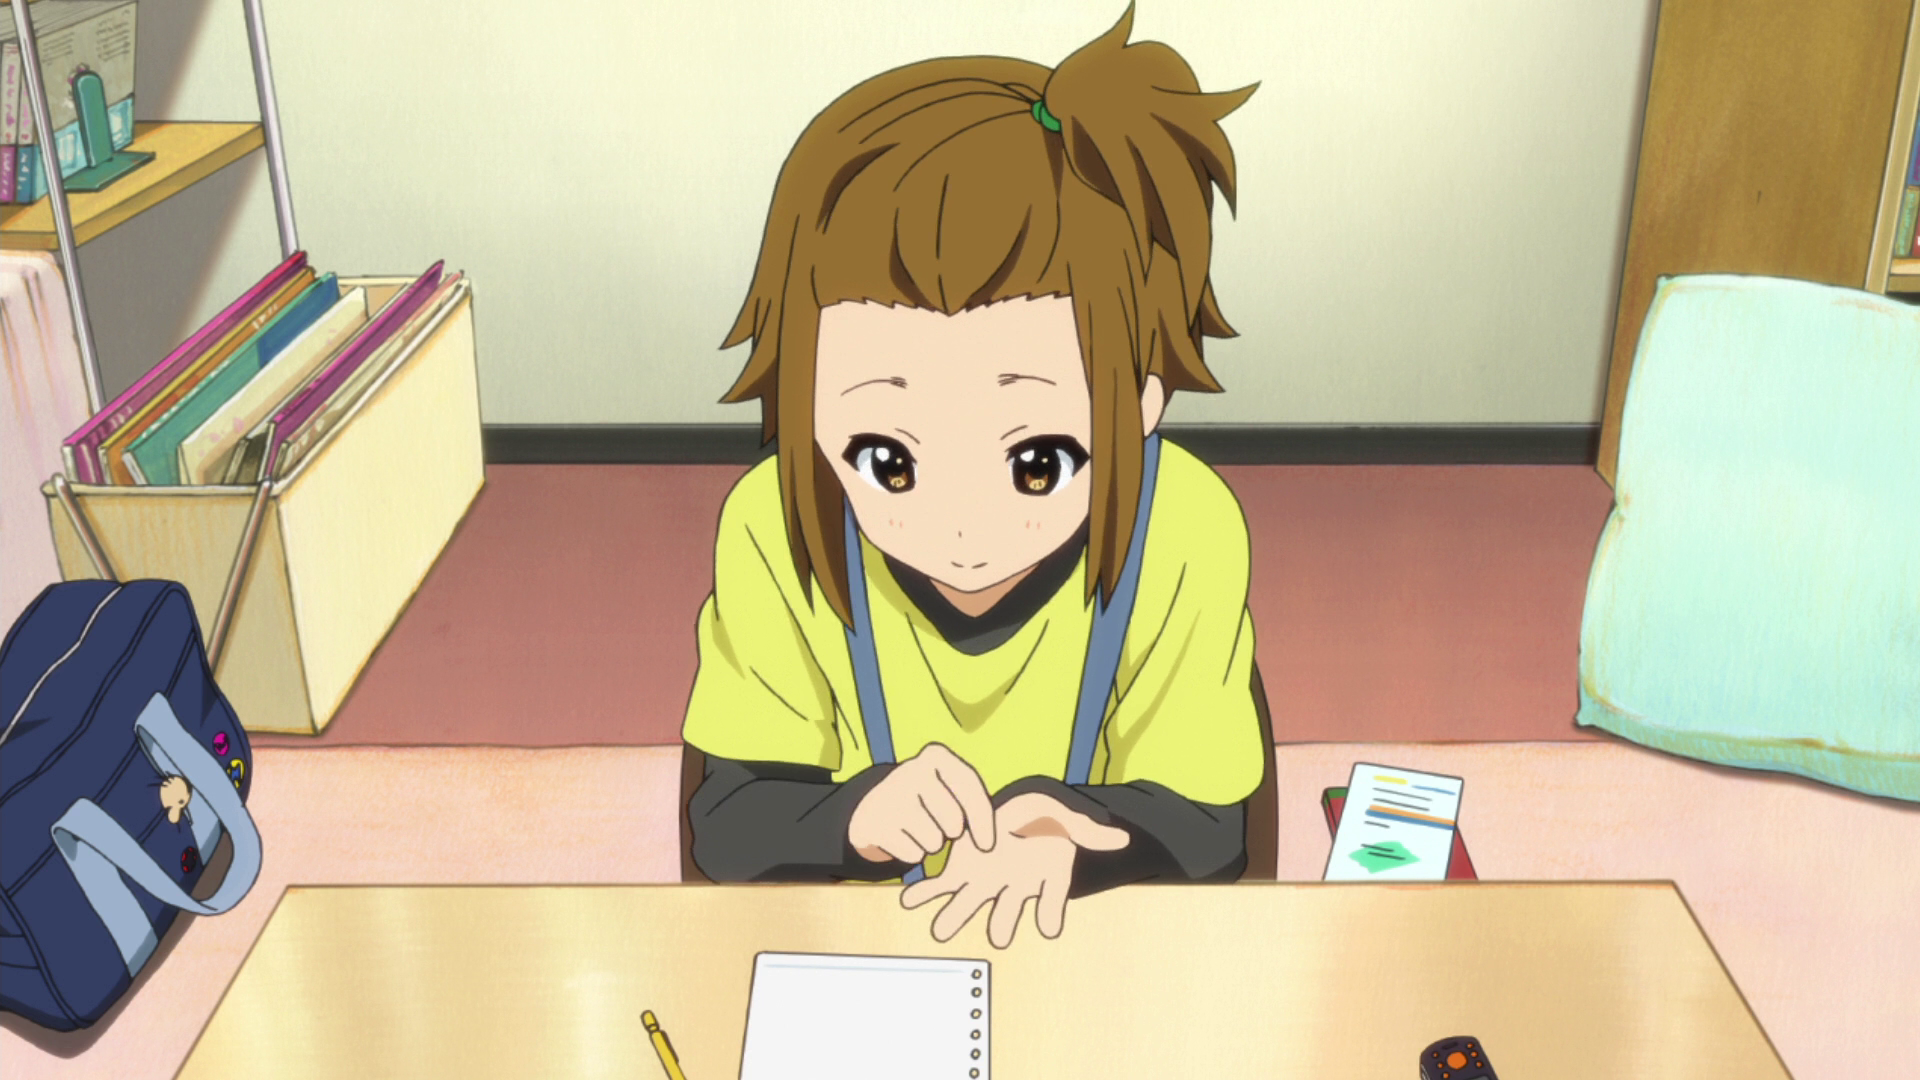 Ritsu thinking about her past